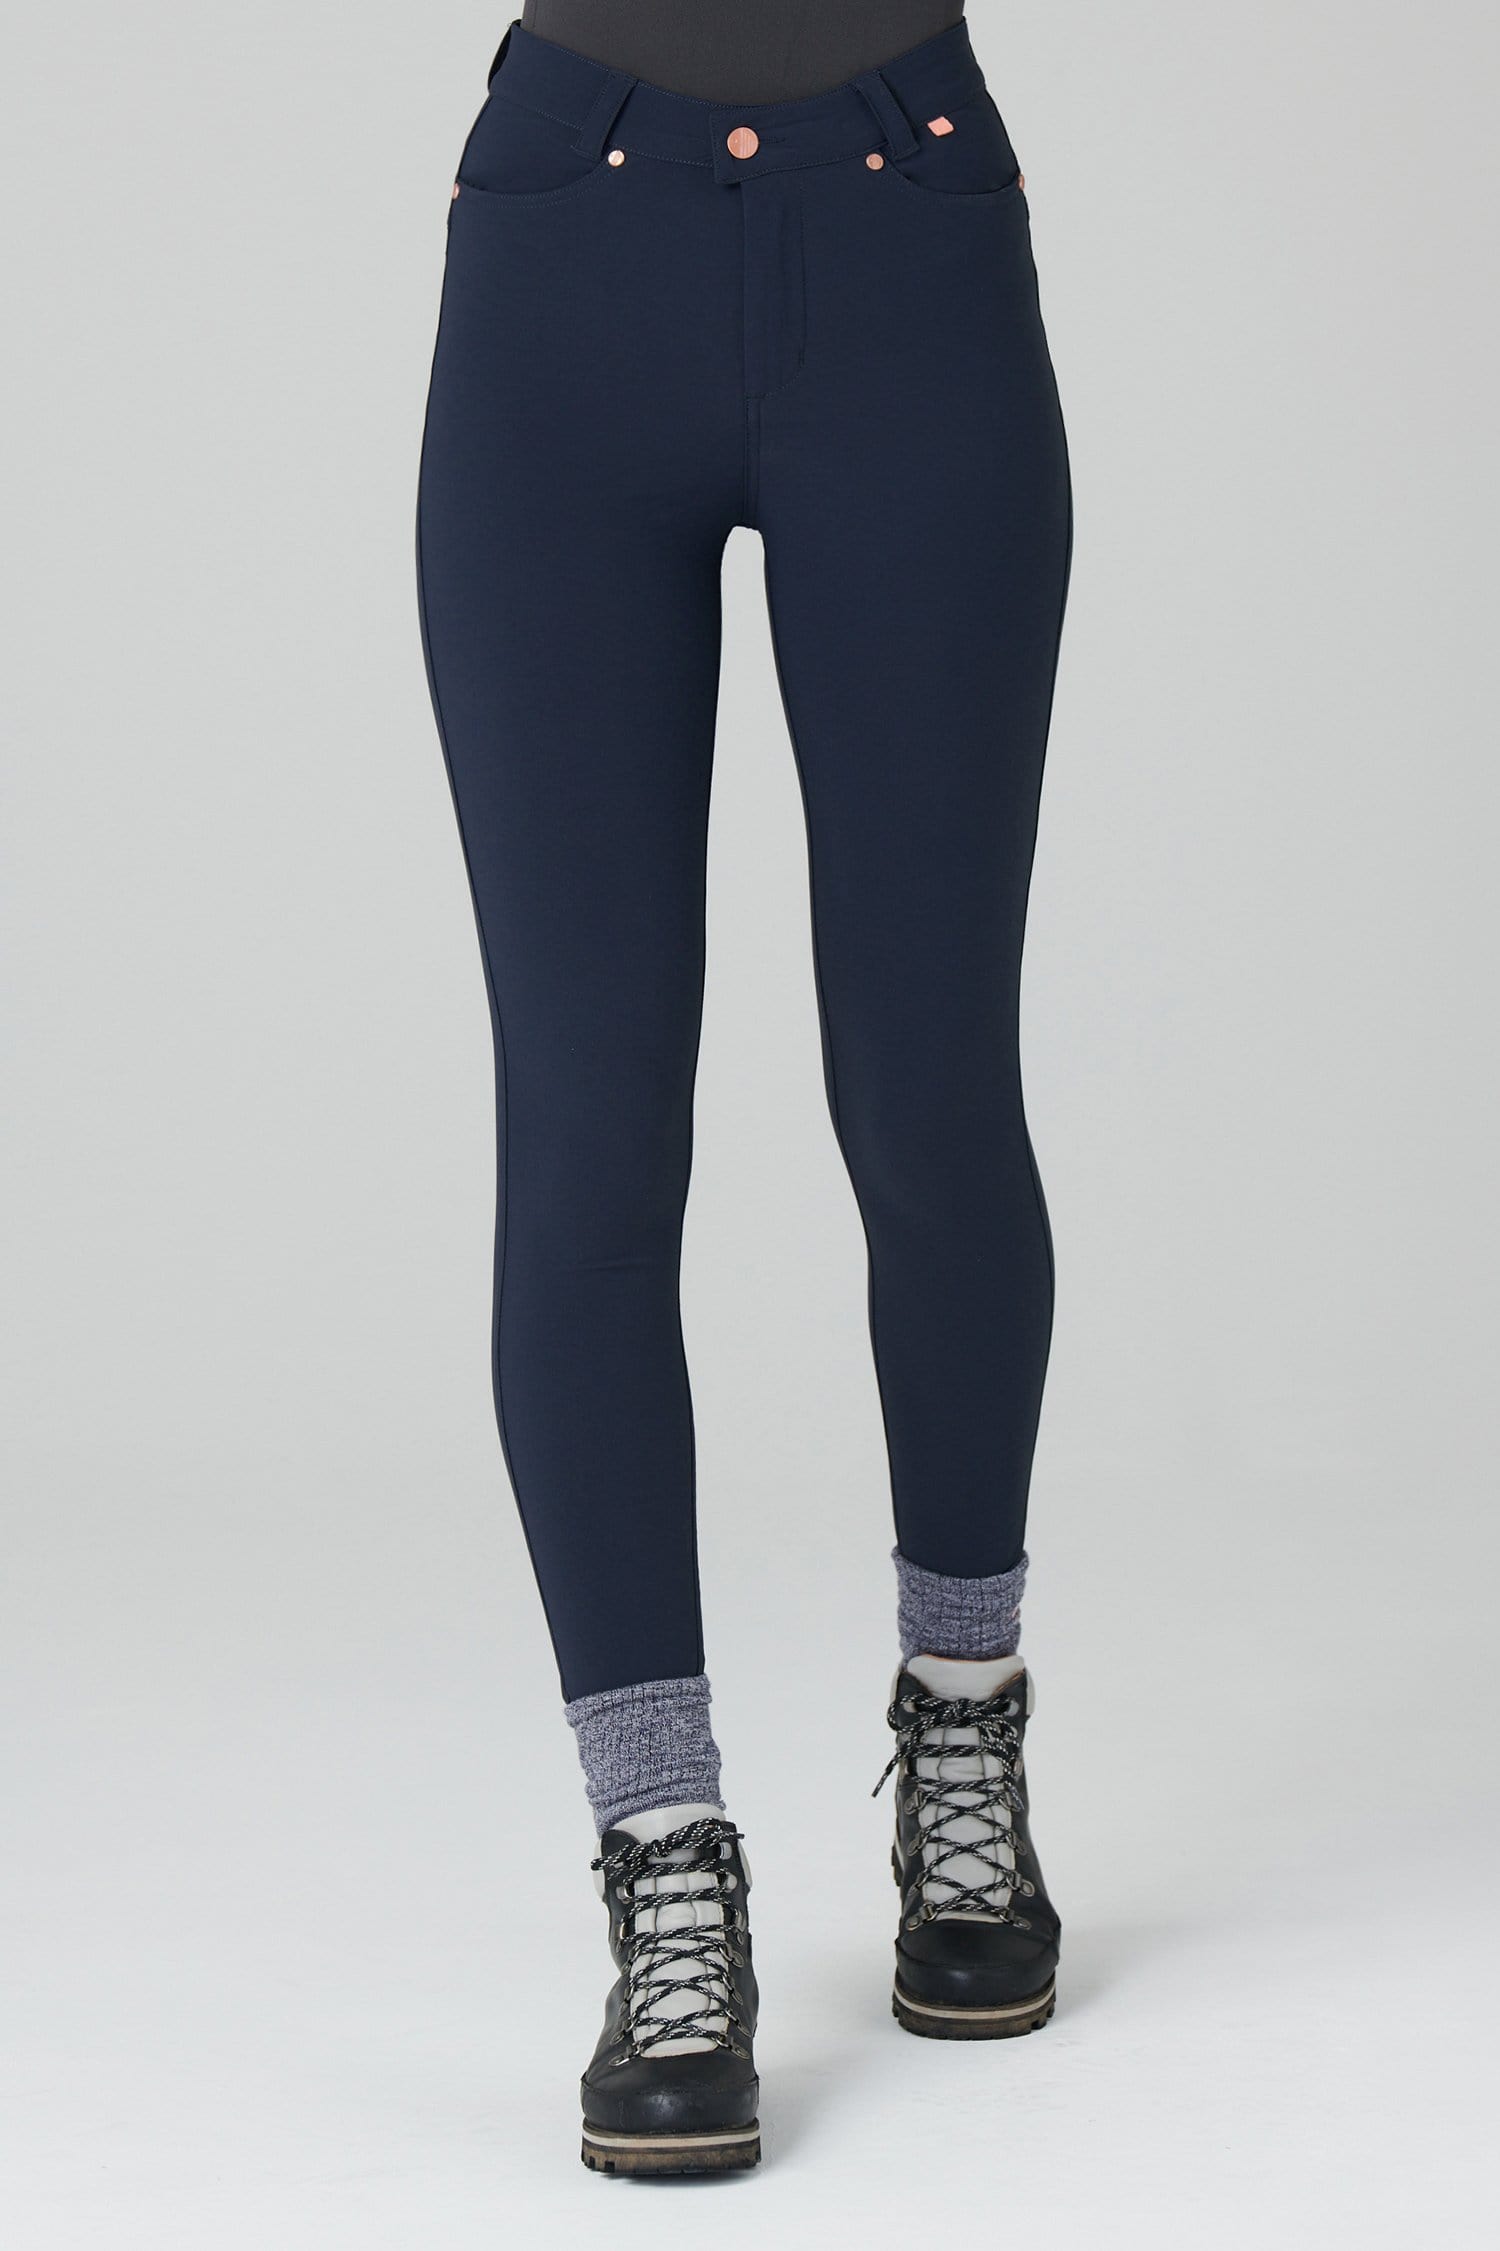 Thermal Skinny Outdoor Trousers - Deep Navy - 24p / Uk6 - Womens - Acai Outdoorwear